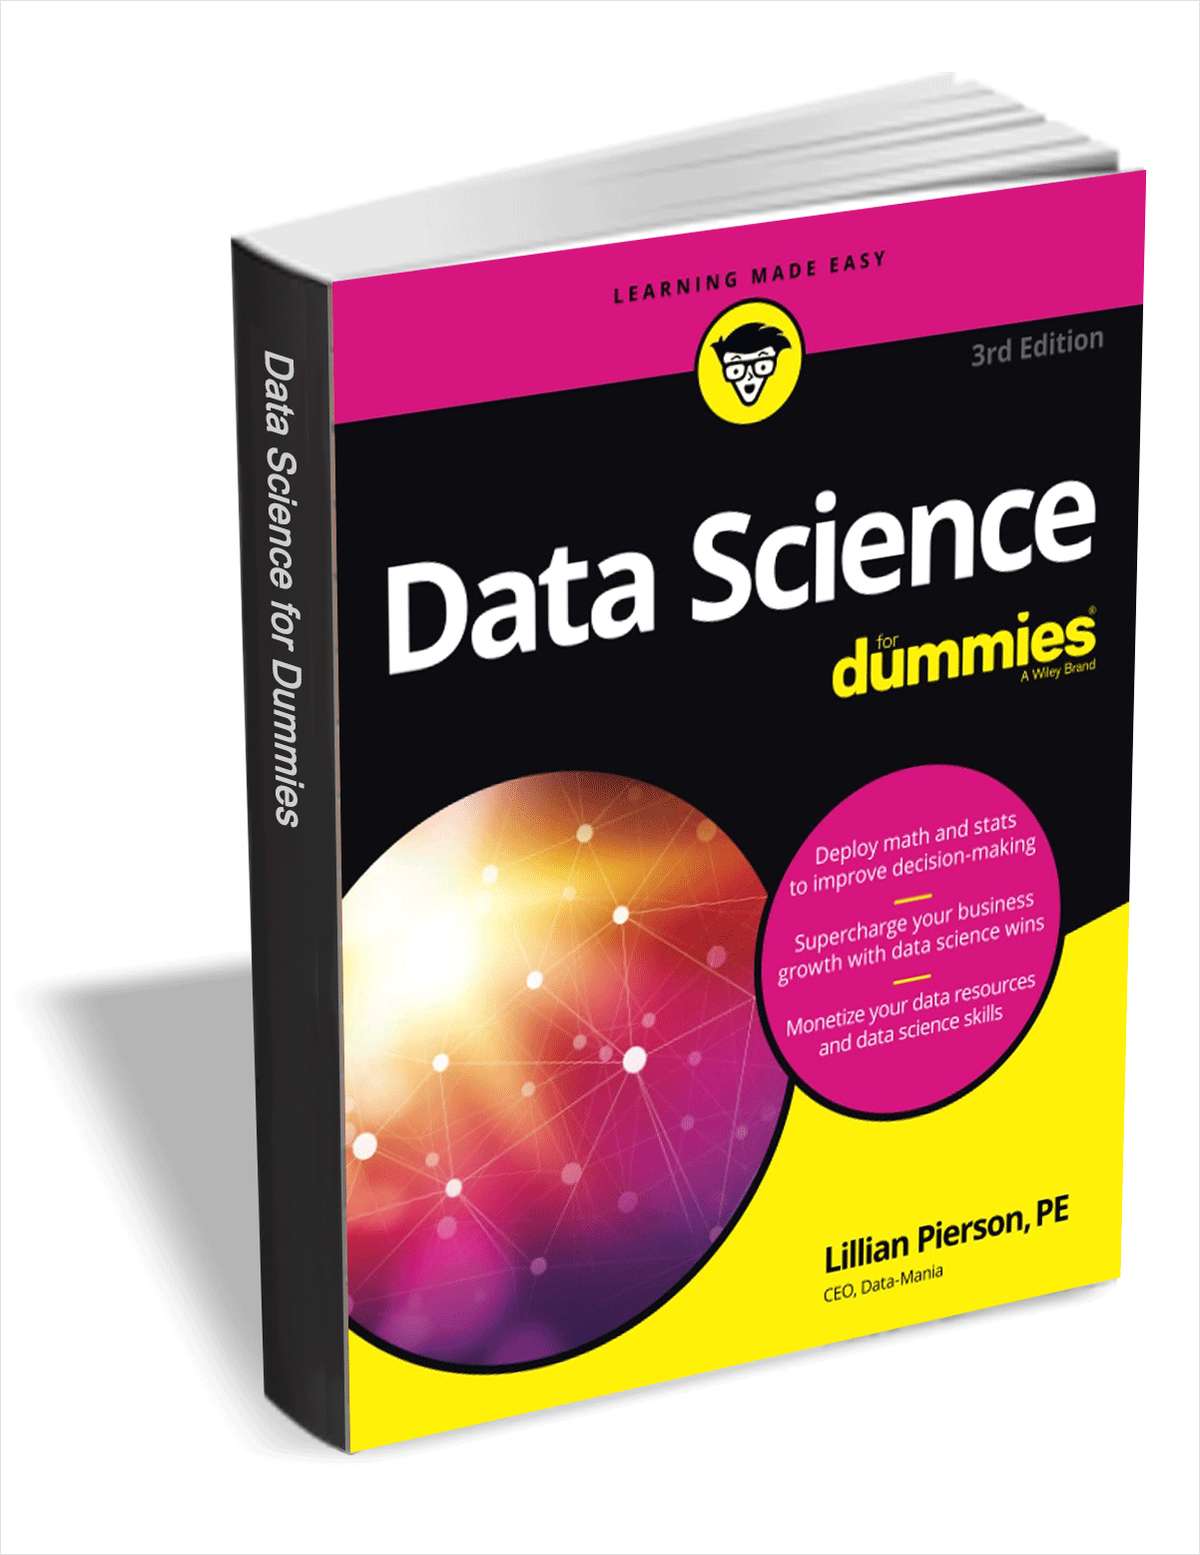 Data Science For Dummies, 3rd Edition ($21.00 Value) FREE for a Limited Time